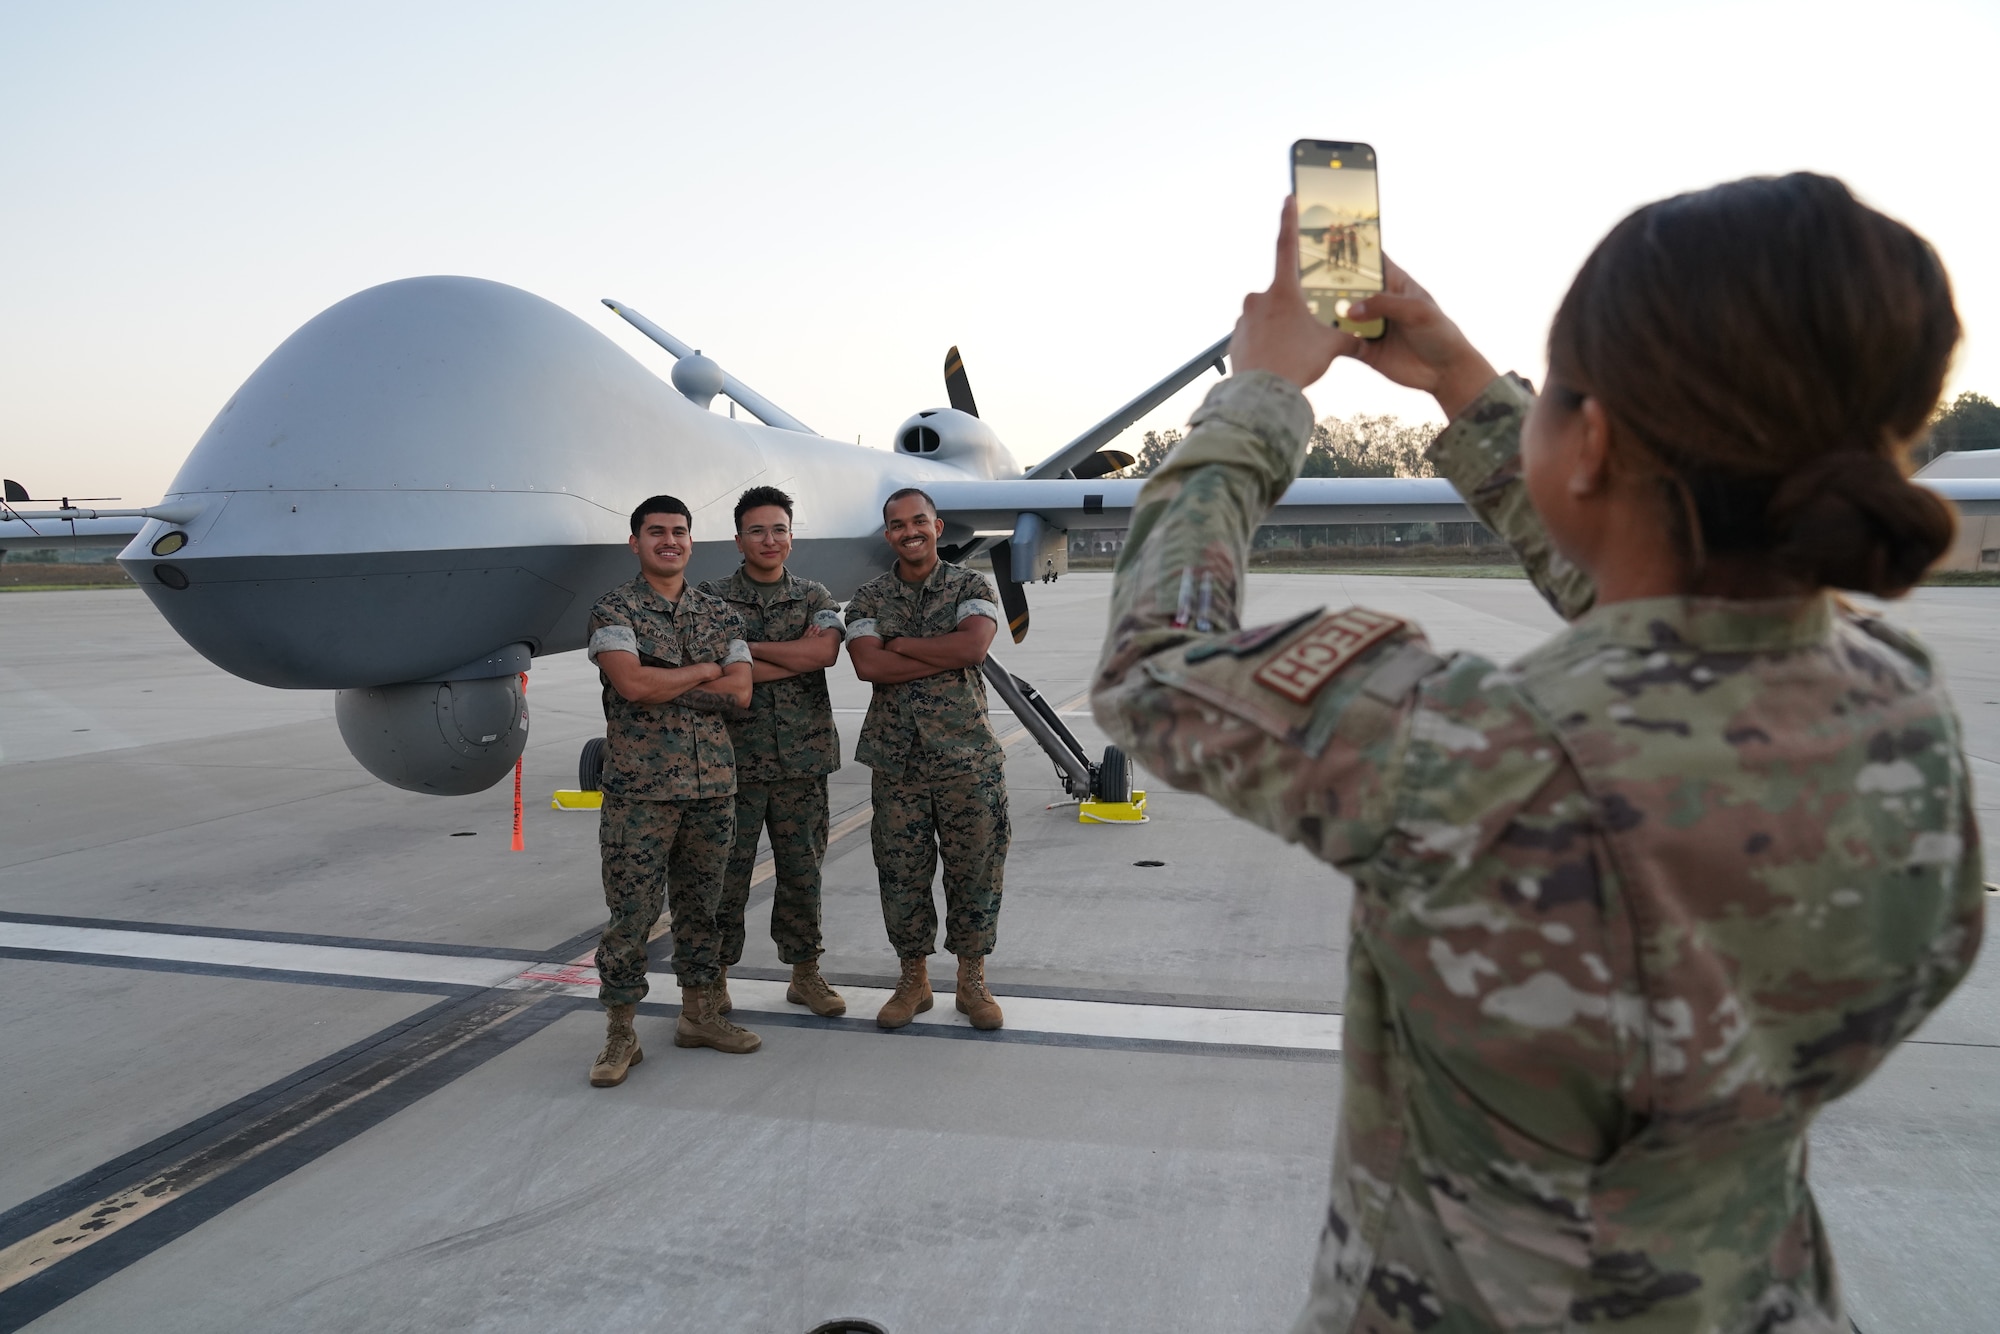 A woman in a military uniform takes a picture of three men in military uniforms in front of an unmanned aircraft.